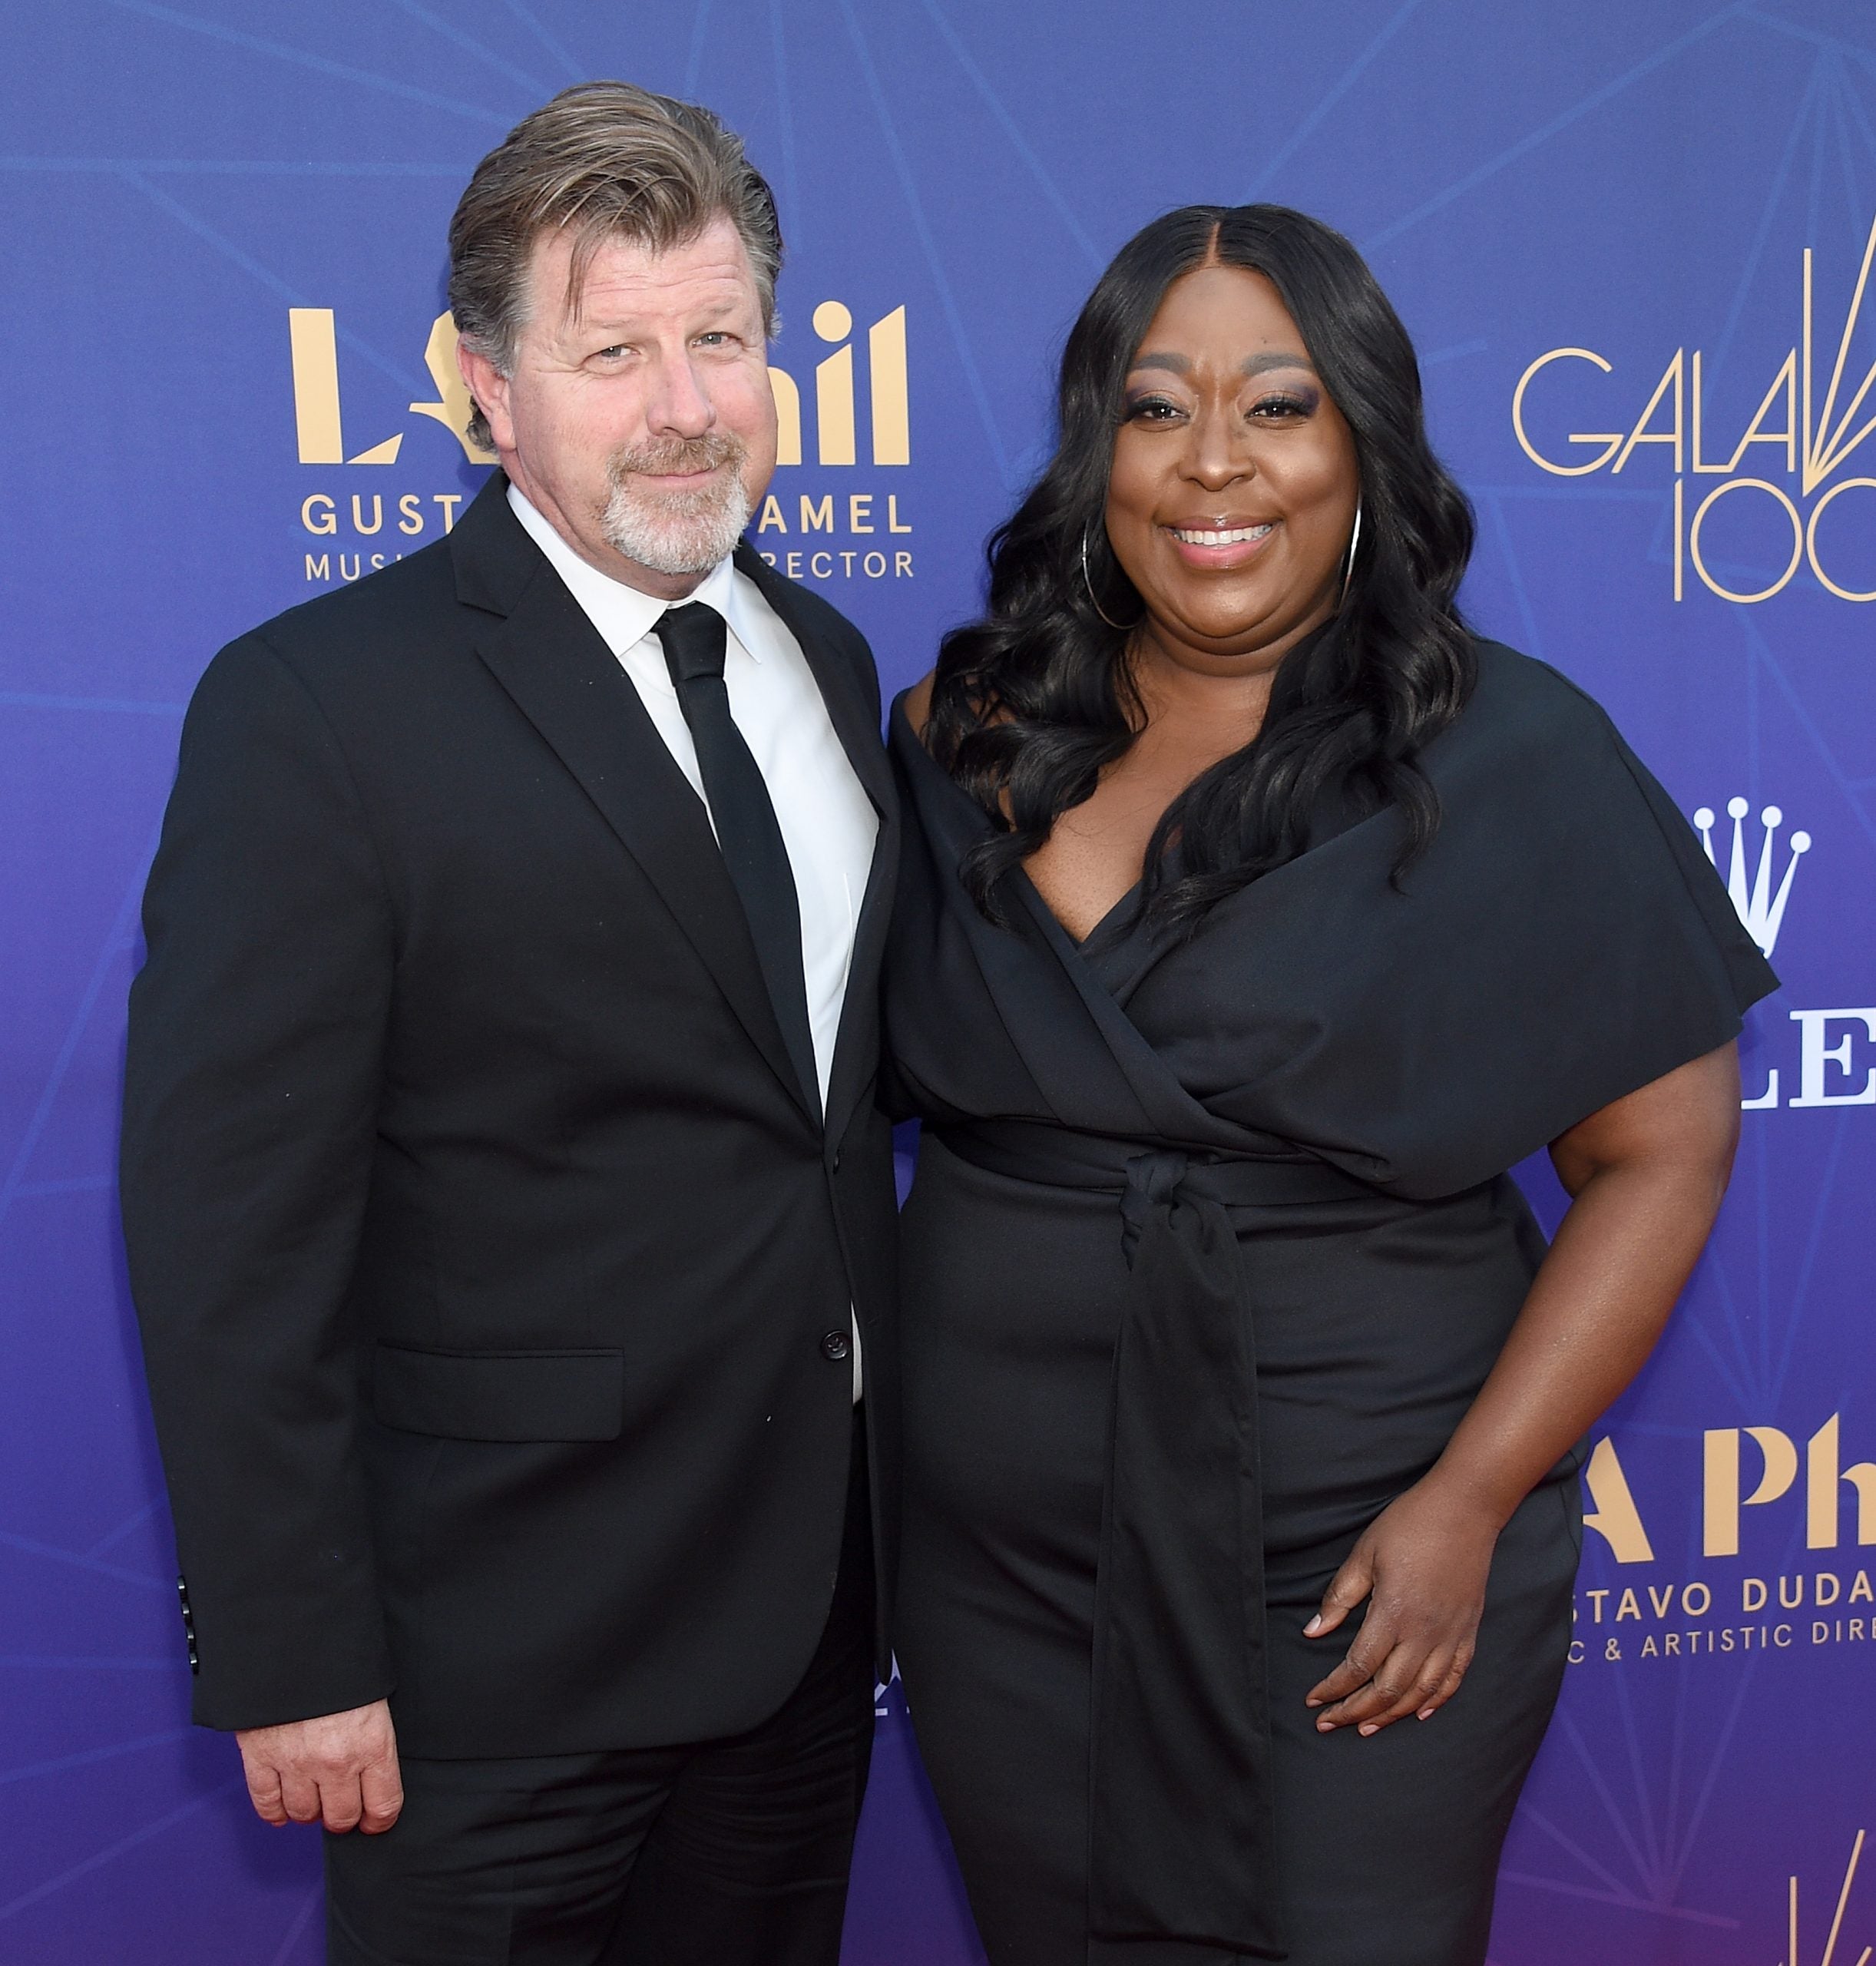 Loni Love Met Her Boyfriend Through Christian Mingle But Says They're Not Christians: 'I Wanted To Meet A Nice Man'